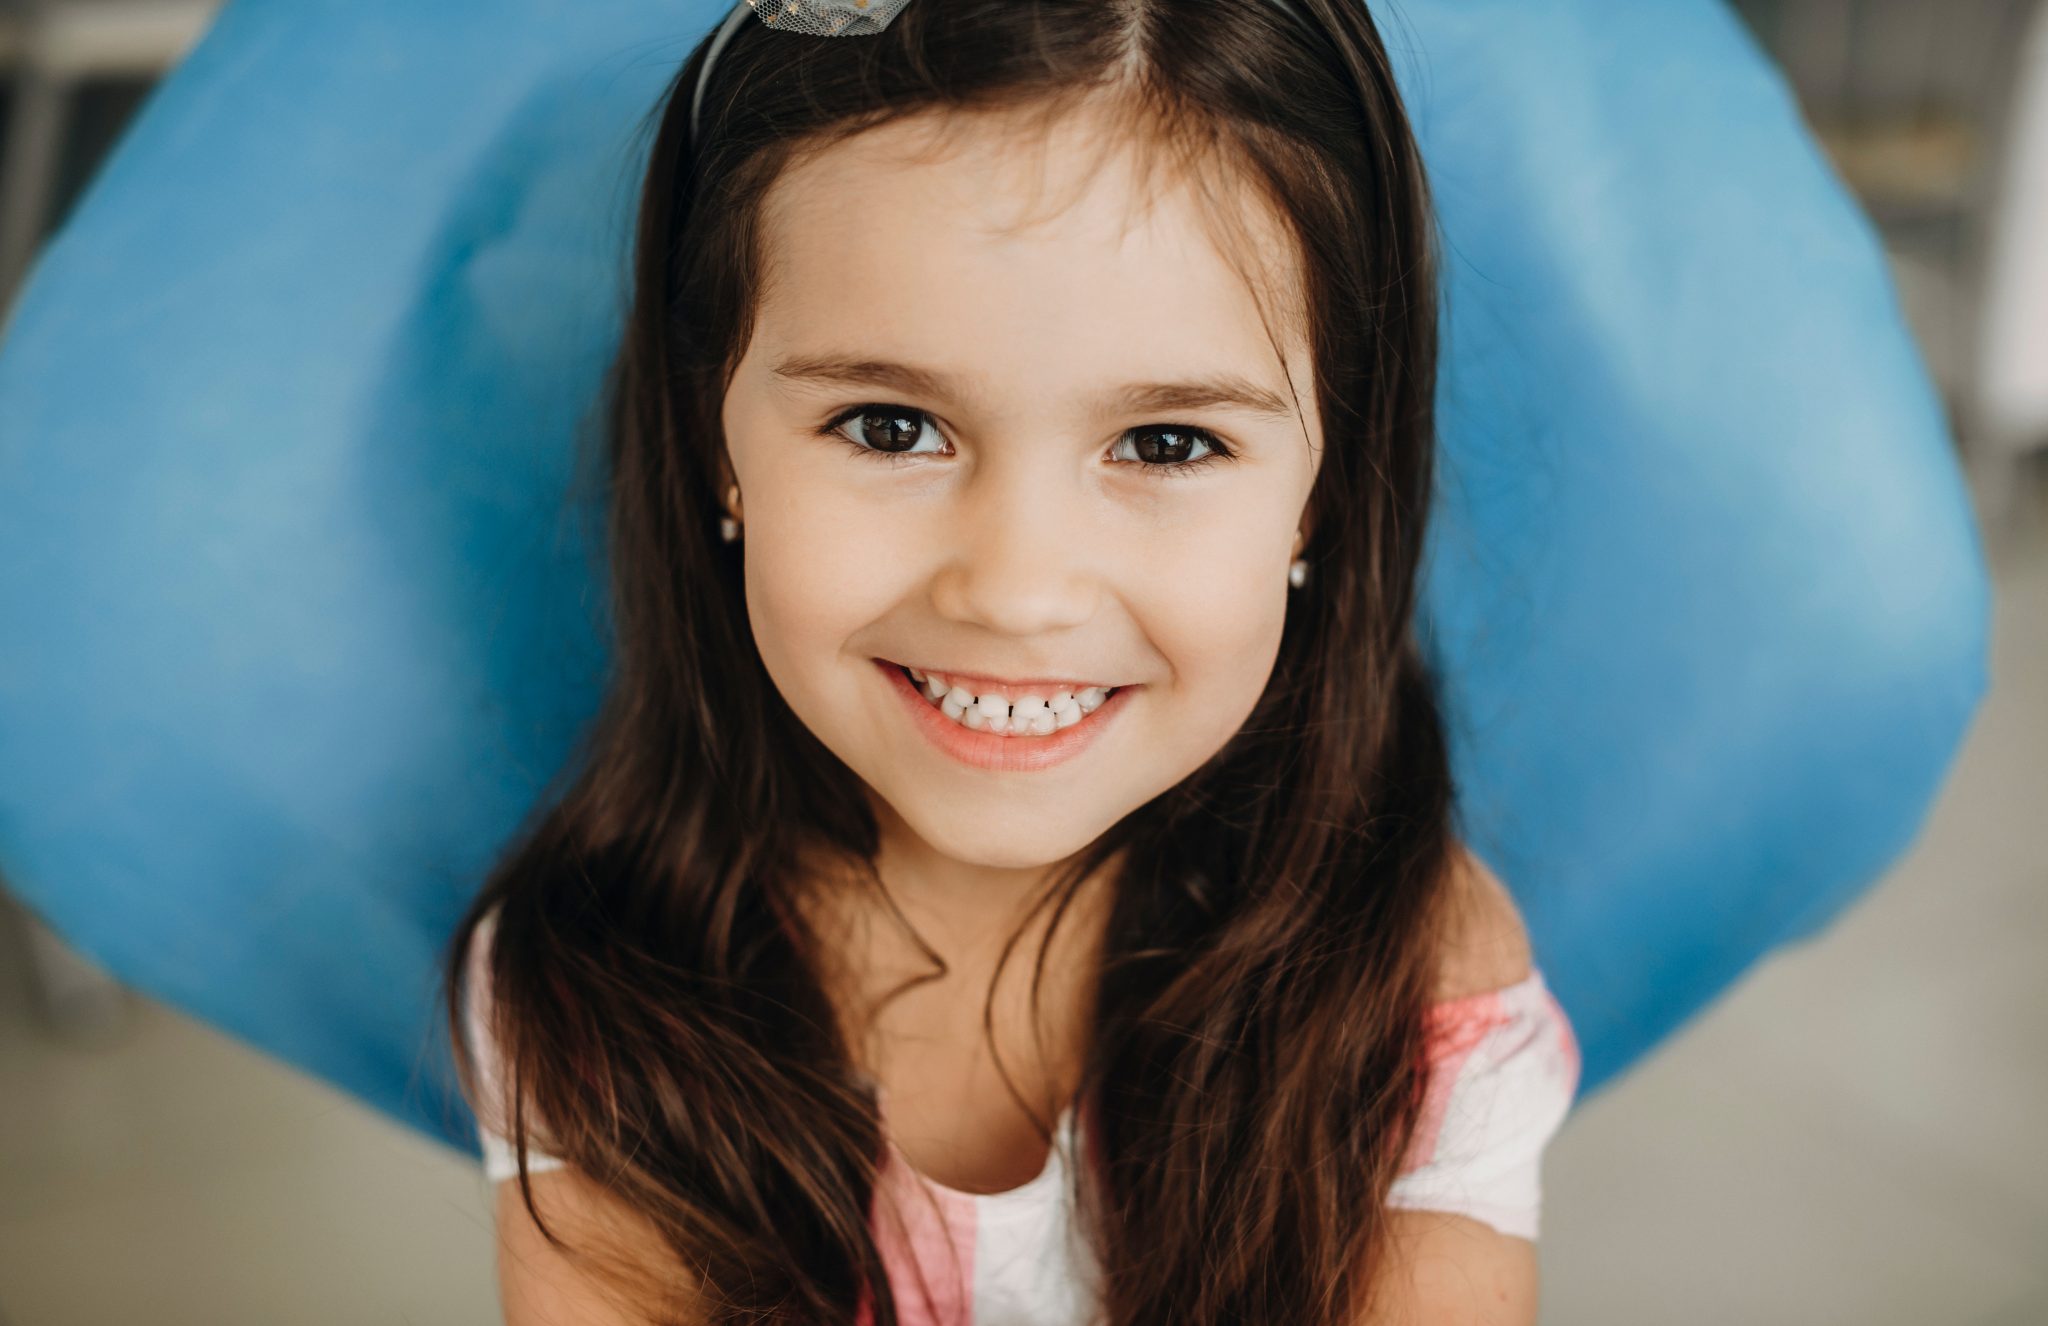 Comprehensive Guide to a Dental Checkup at Little Smiles Pediatric Dentistry: Your Trusted Pediatric Dentist in Post Falls, Hayden, and Spokane Valley